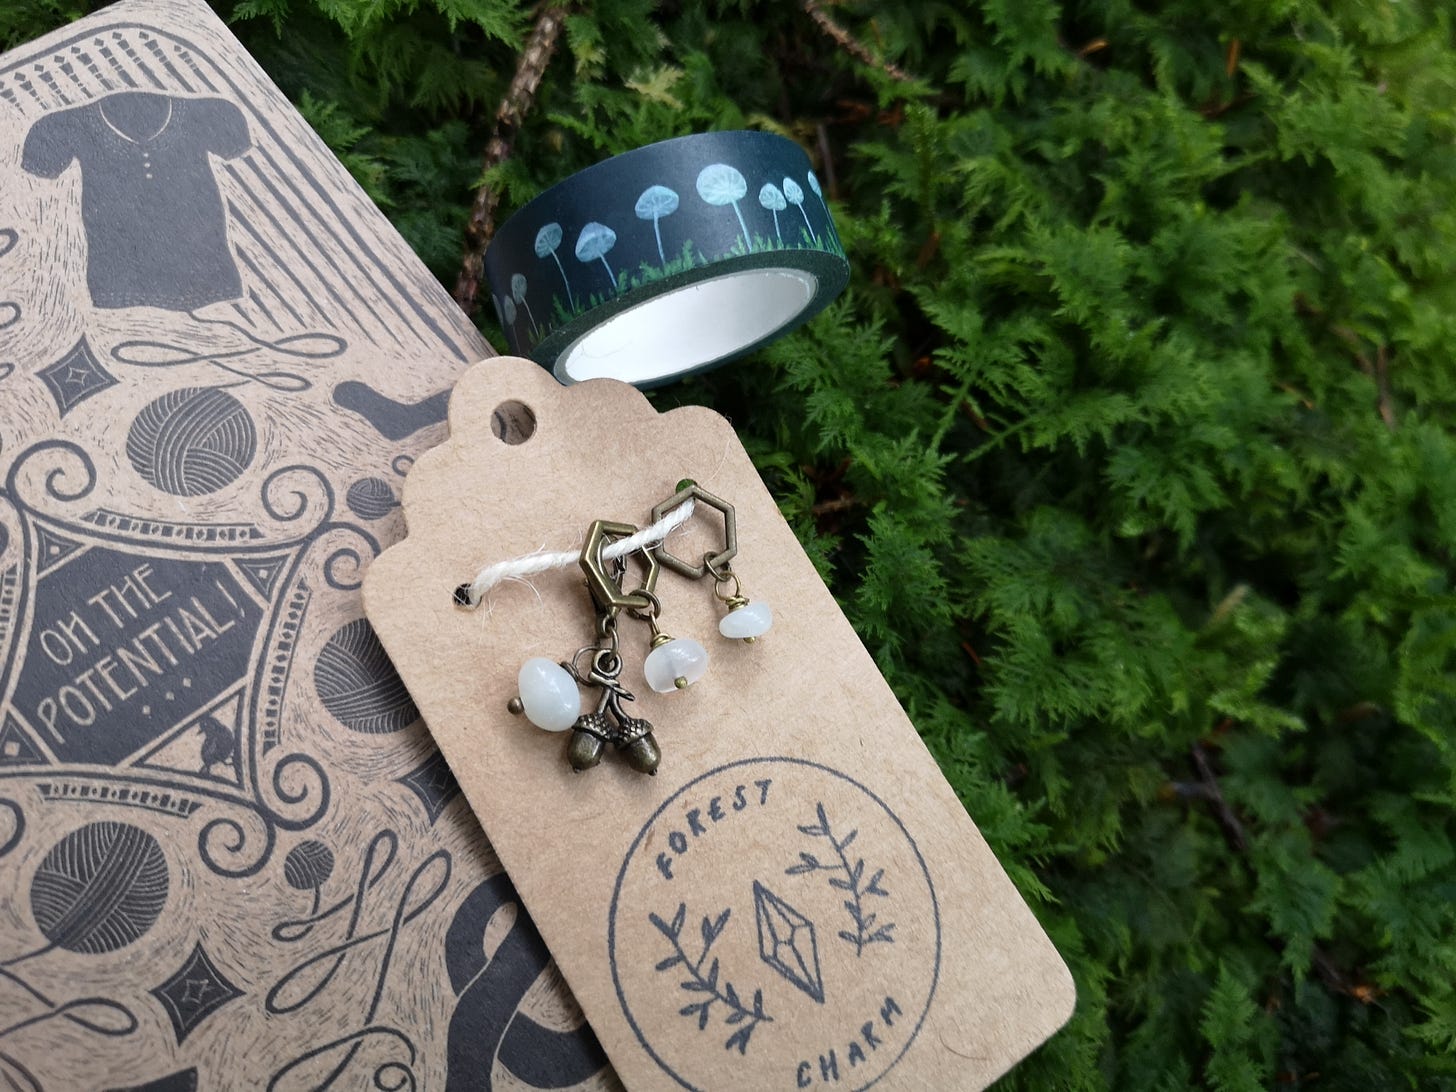 Image description: A bundle of goodies lying on some squishy green moss: a set of stitch markers and progress keepers featuring moonstone beads and an acorn charm, lying on top of crafting notebook and next to a roll of dark blue washi tape with white mushrooms.